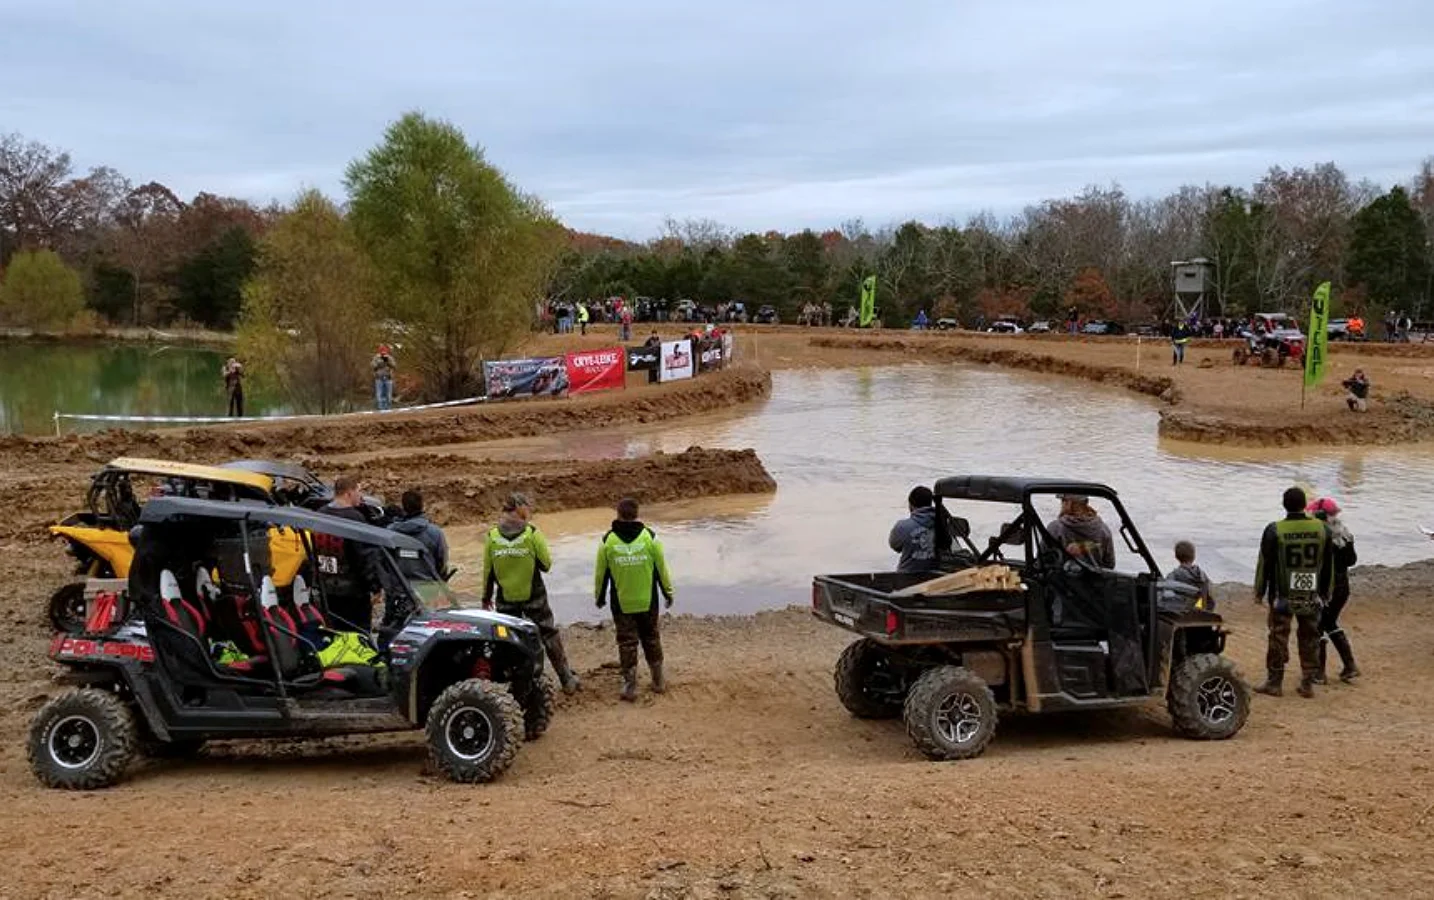 Polaris side-by-sides or UTVs sitting next to a mud pit - SpecializedATV